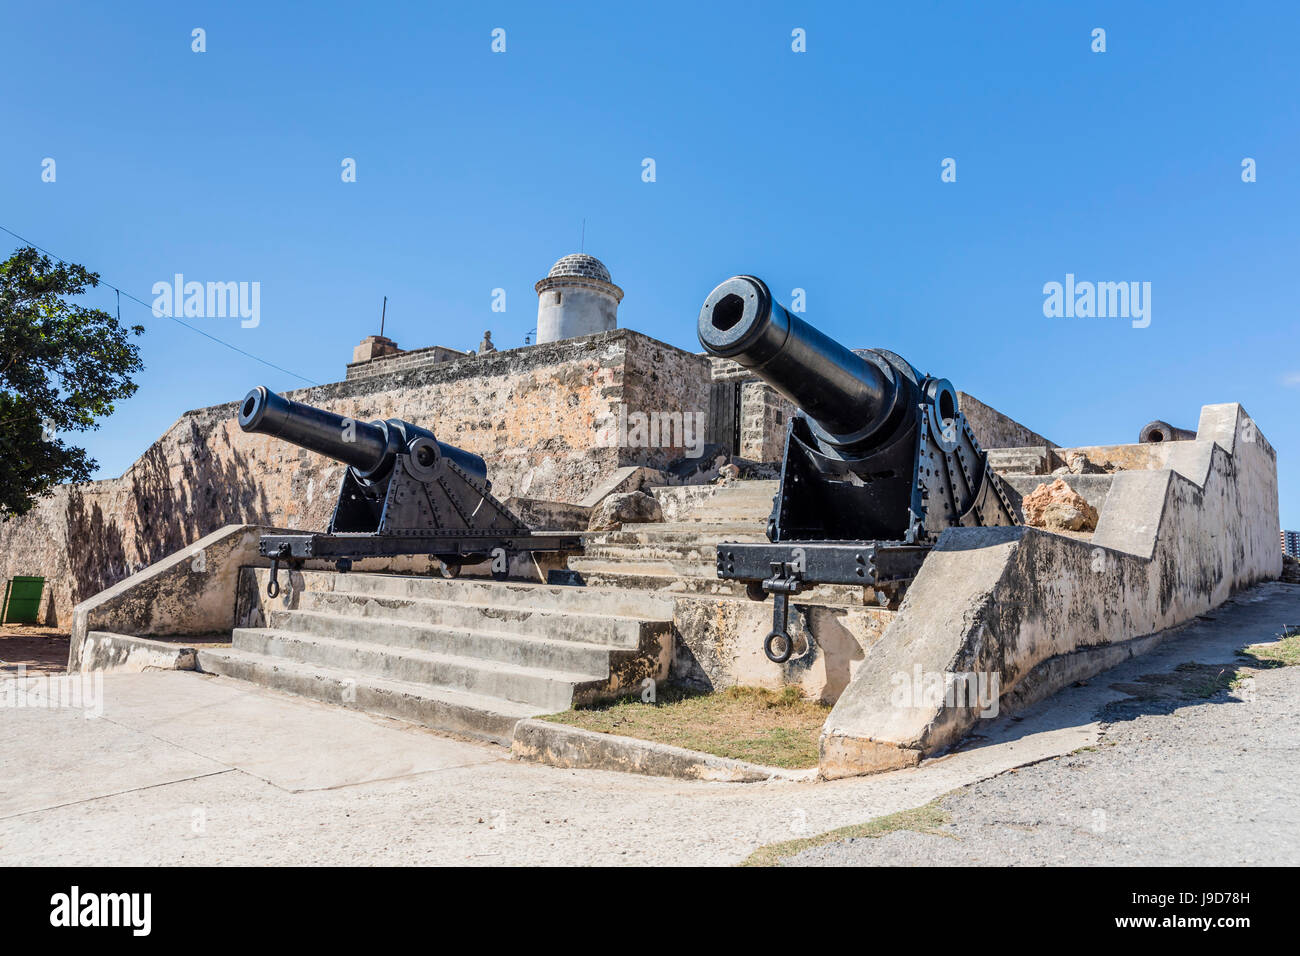 The Castillo de Jagua fort, erected in 1742 by King Philip V of Spain, near Cienfuegos, Cuba, West Indies, Caribbean Stock Photo